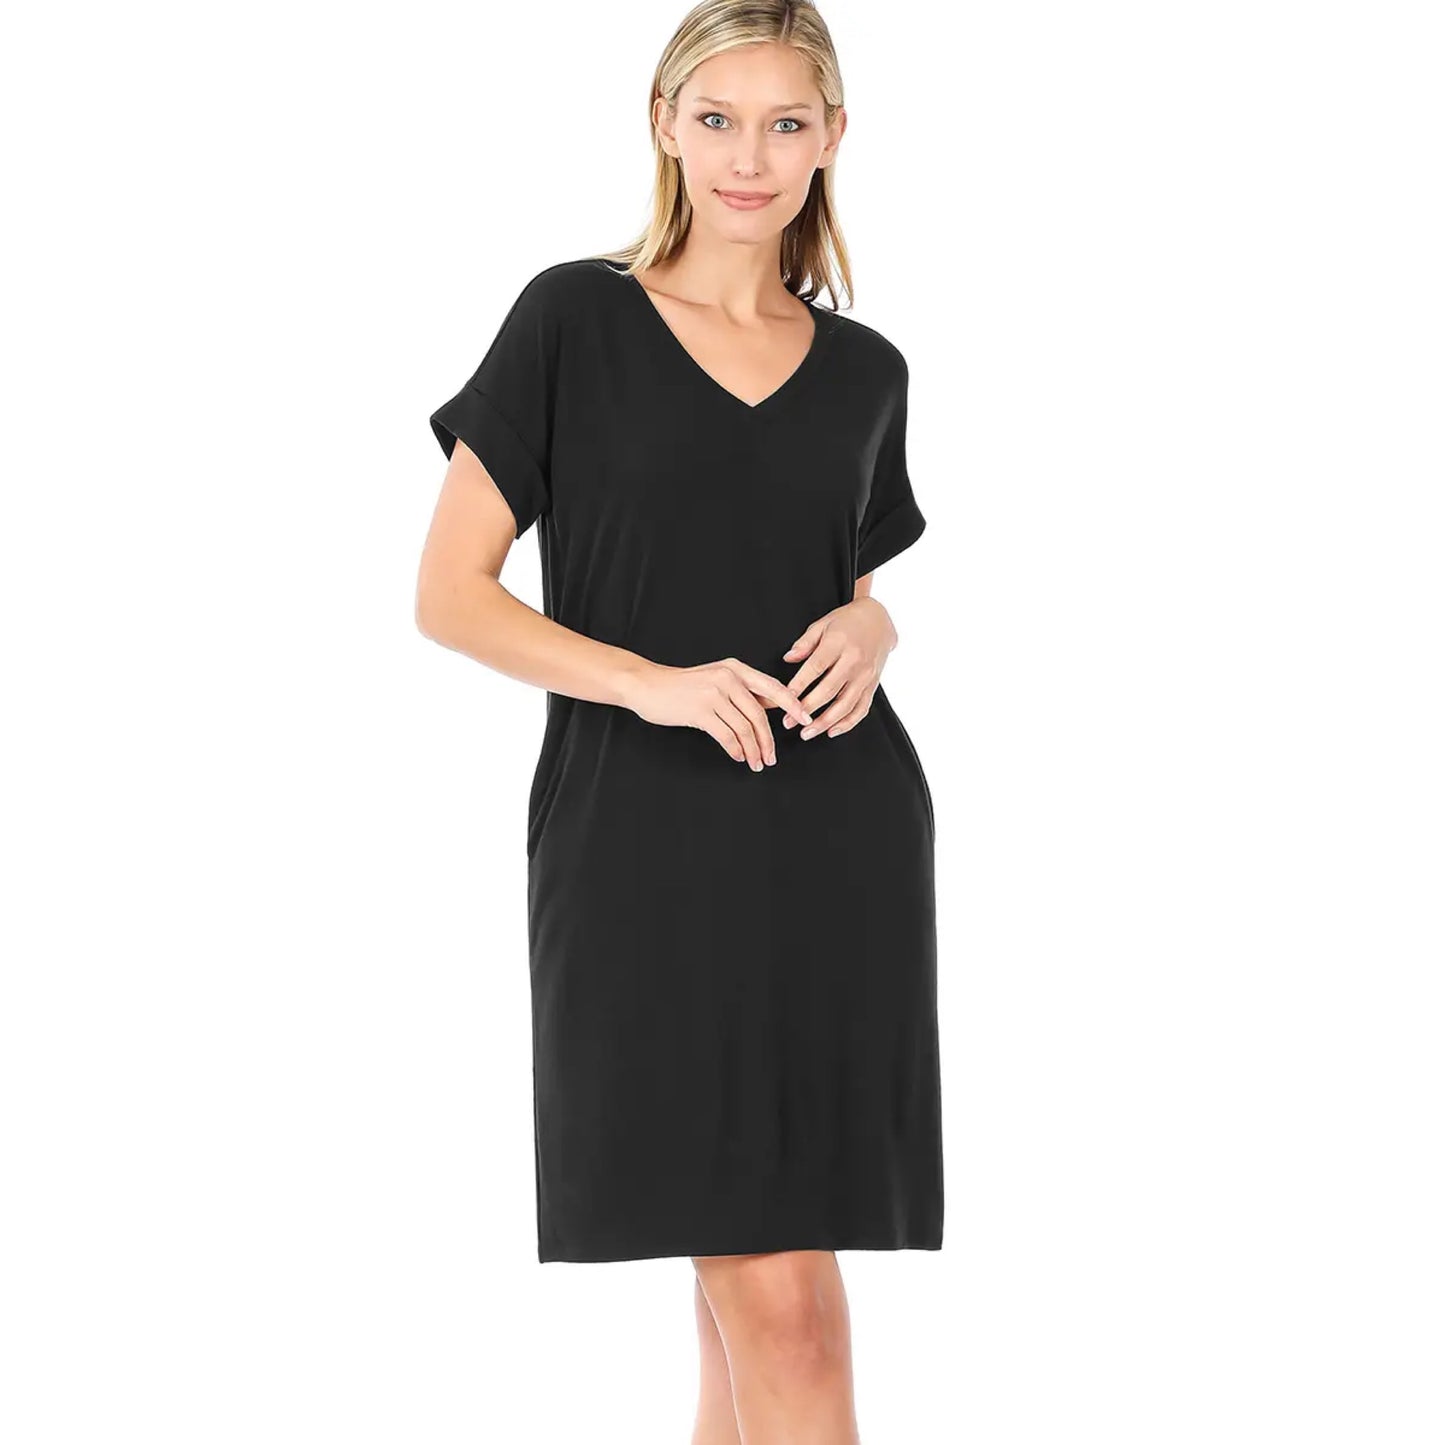 Black Roll Up Sleeve Dress with Pockets